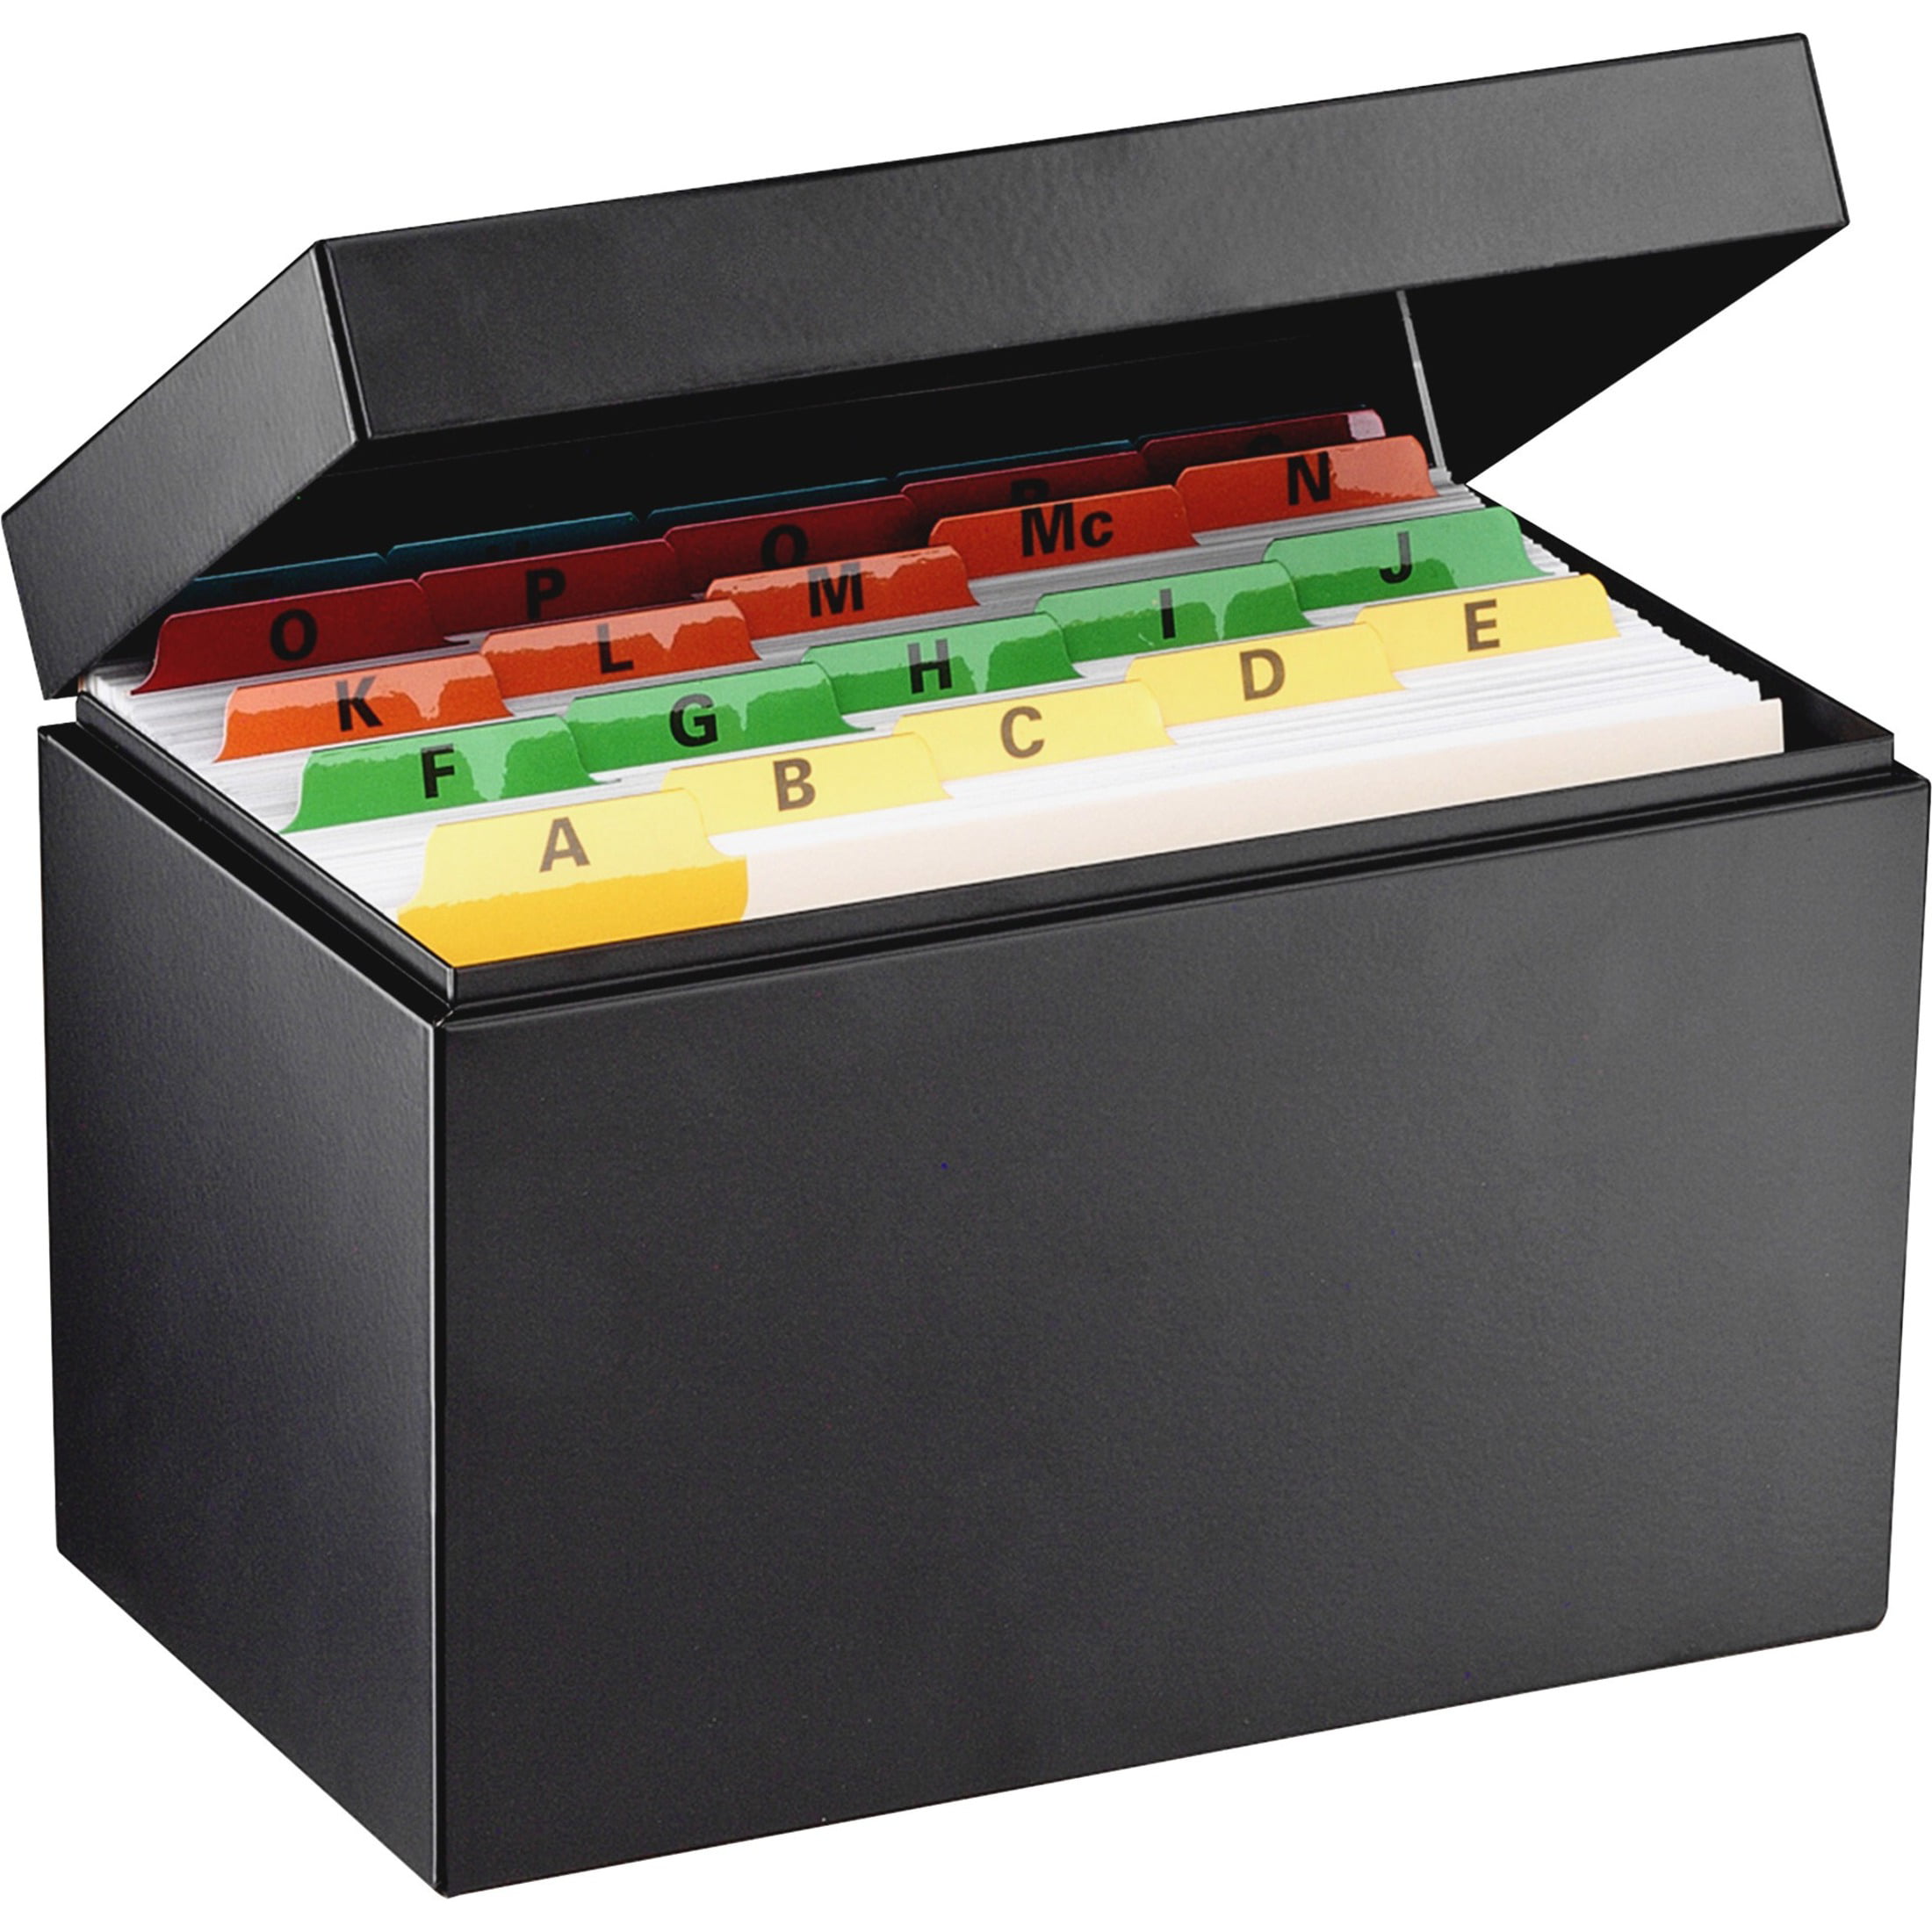 Details about   Steel Hinged Card File Box 5" × 8" × 12" Holds Over 1,500 Cards New Black